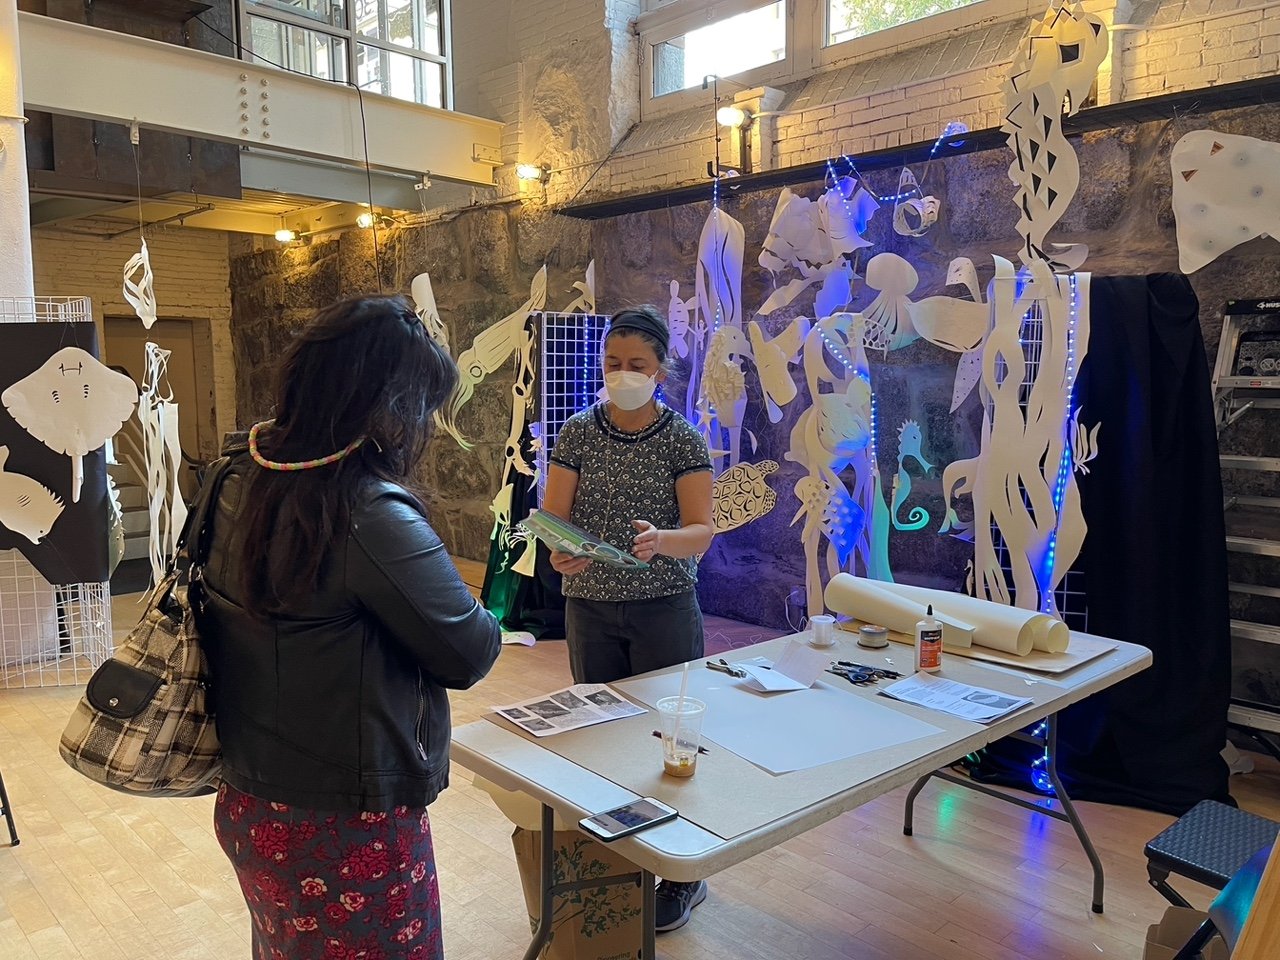  During 2021 Open Studios, guest artist Nedret Andre presented "Protecting Our Seagrass Habitat" at 300 Summer Street, inviting public participation to help build awareness of this fragile habitat.  More  